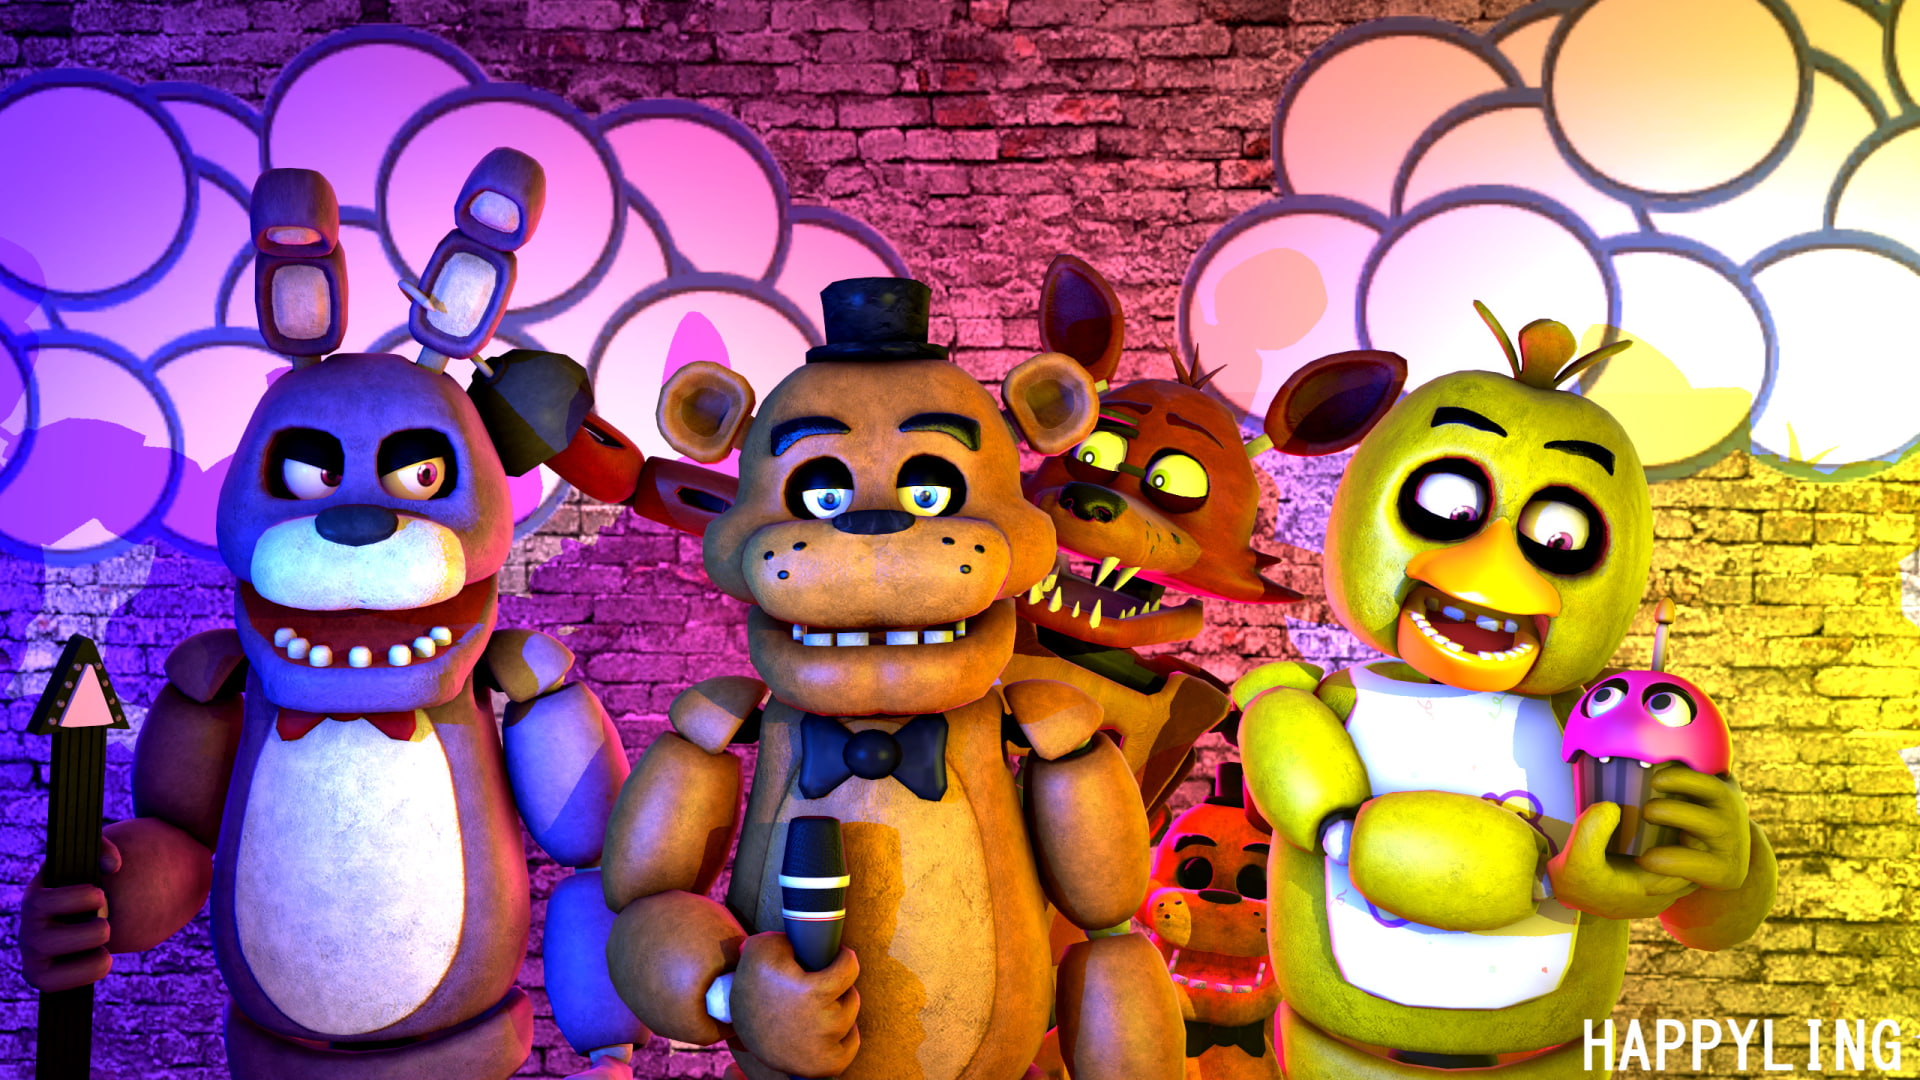 Five Nights At Freddy's Group - HD Wallpaper 